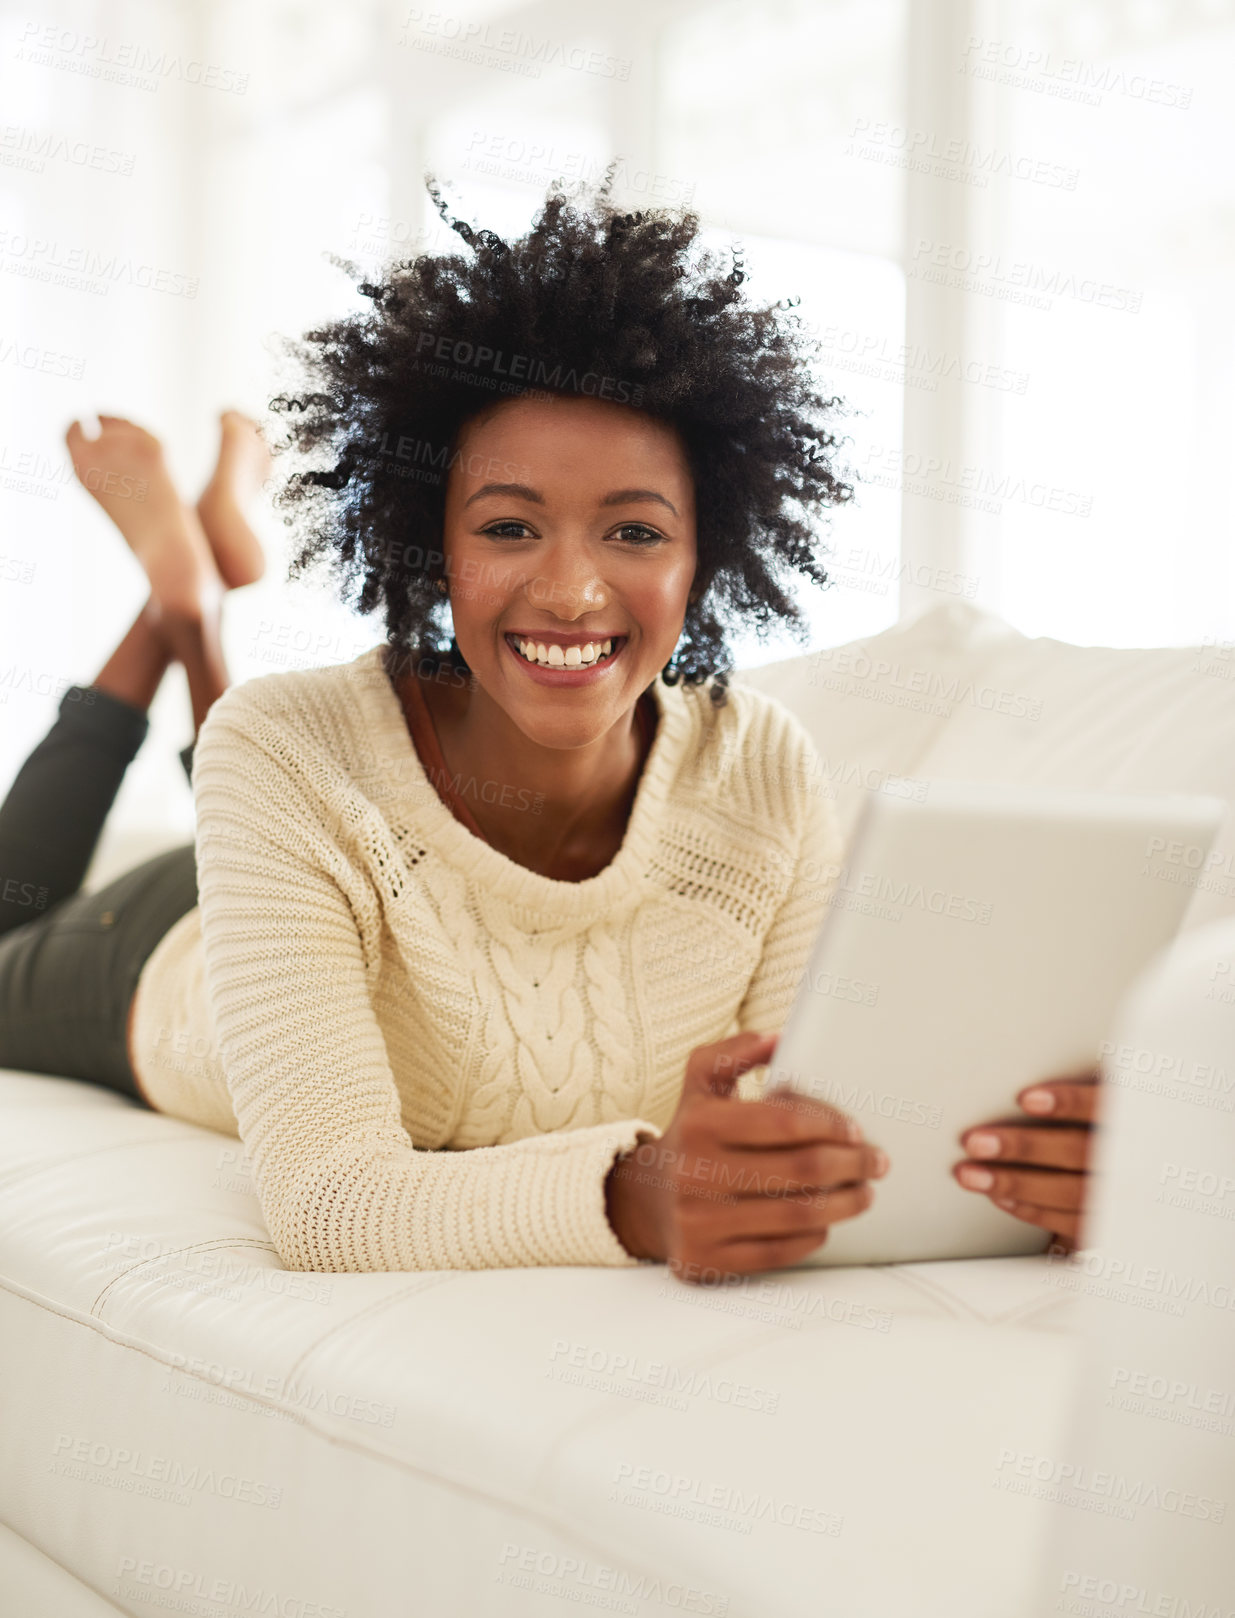 Buy stock photo Portrait of an attractive young using her tablet while lying on the sofa at home